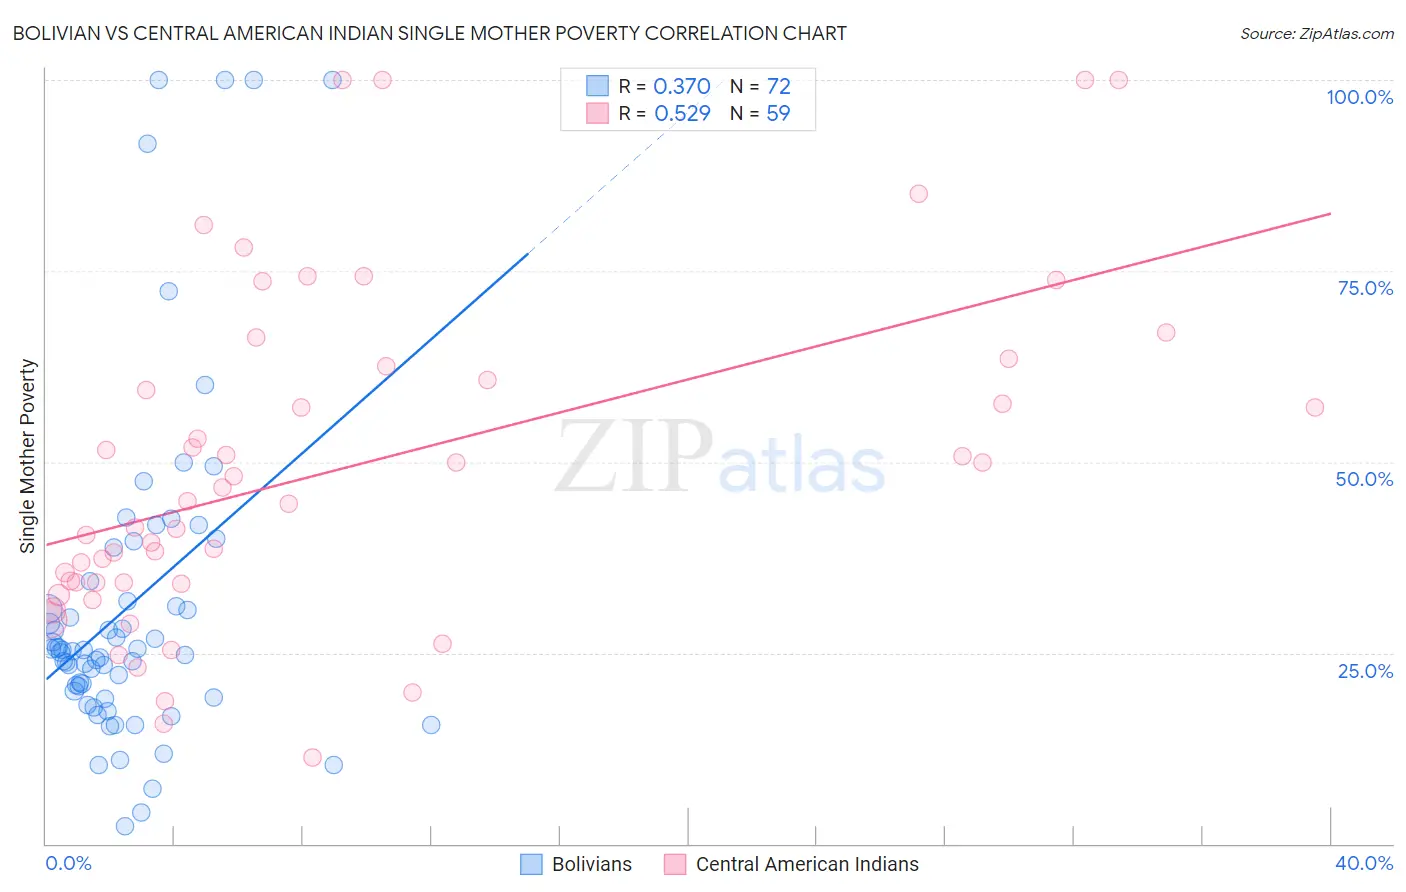 Bolivian vs Central American Indian Single Mother Poverty